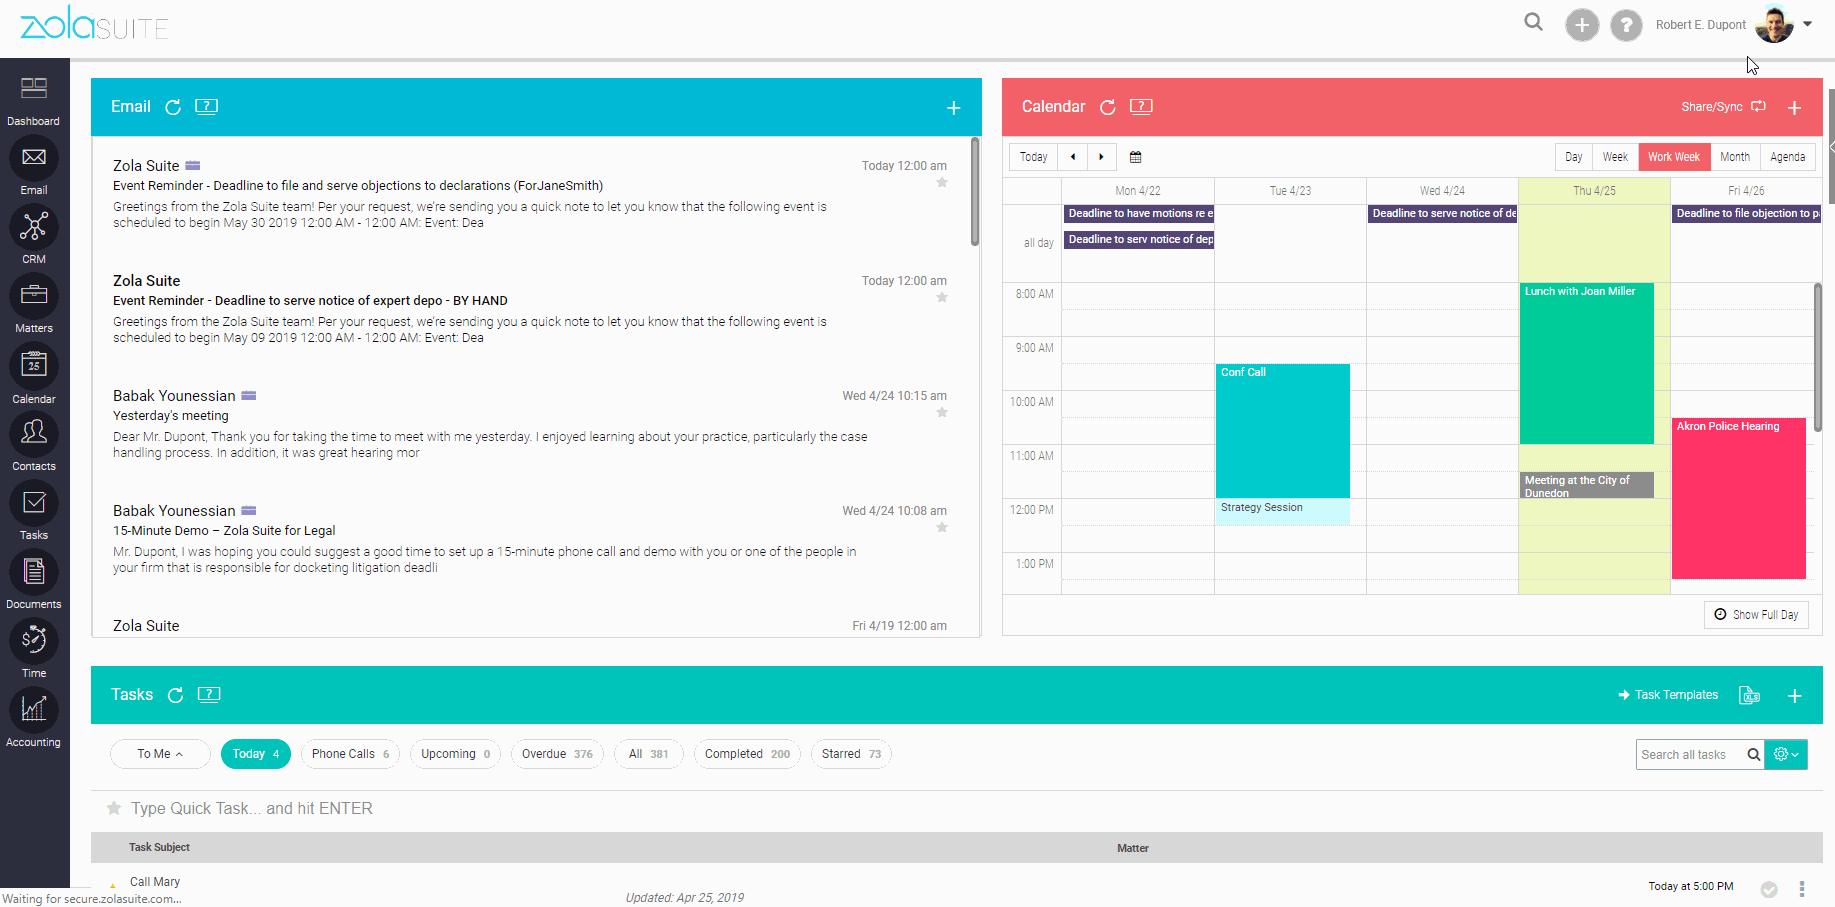 How do I change the names and colors of event categories?